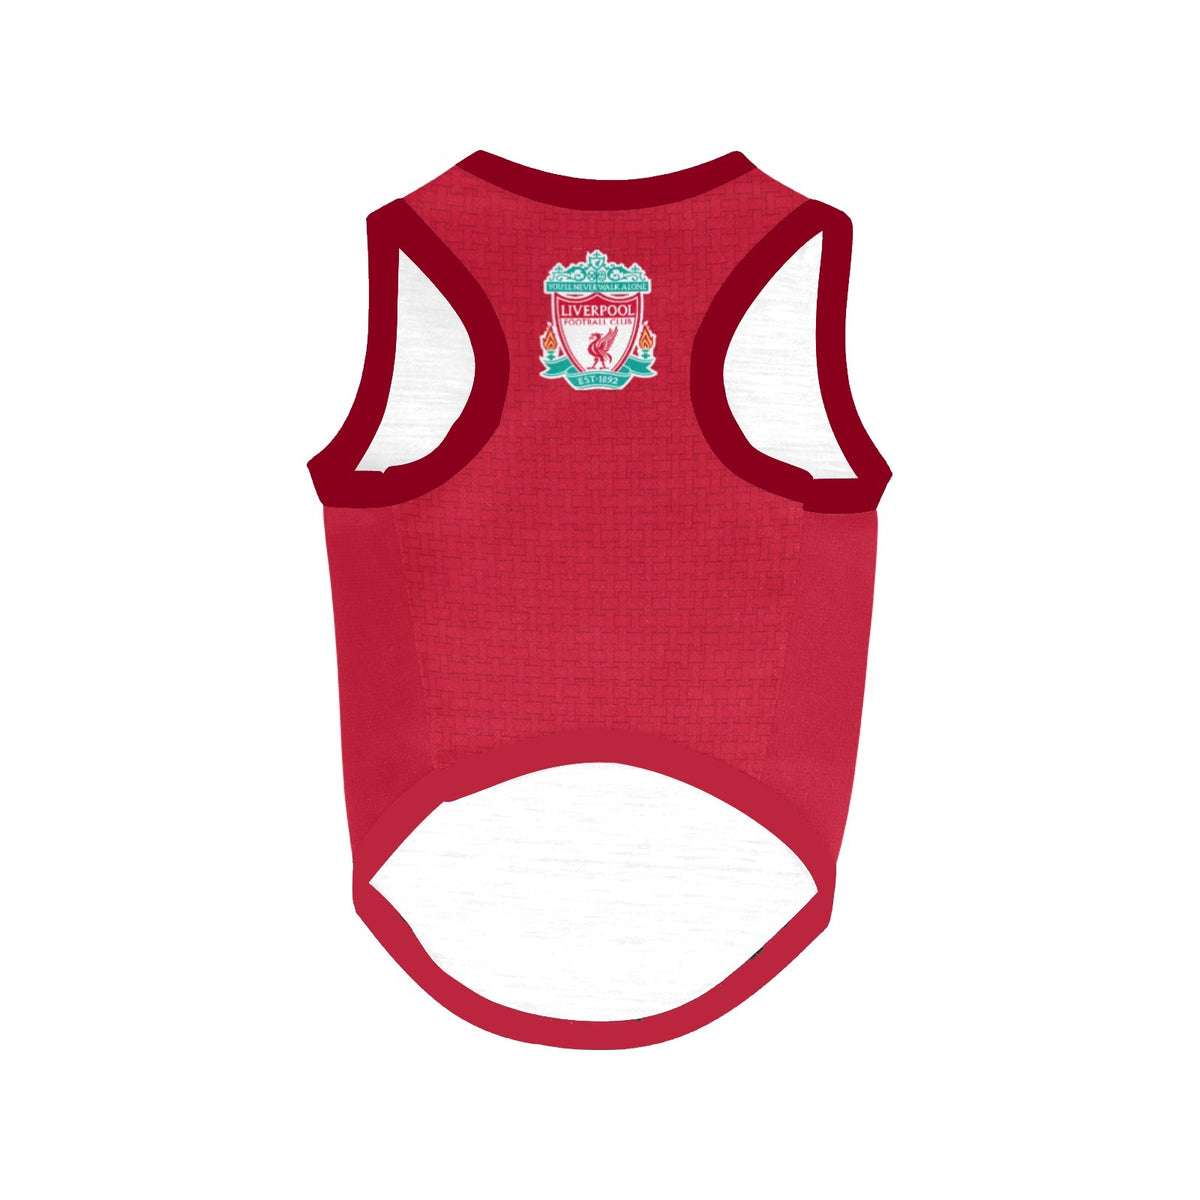 Liverpool FC Inspired Personalized Jersey Tank